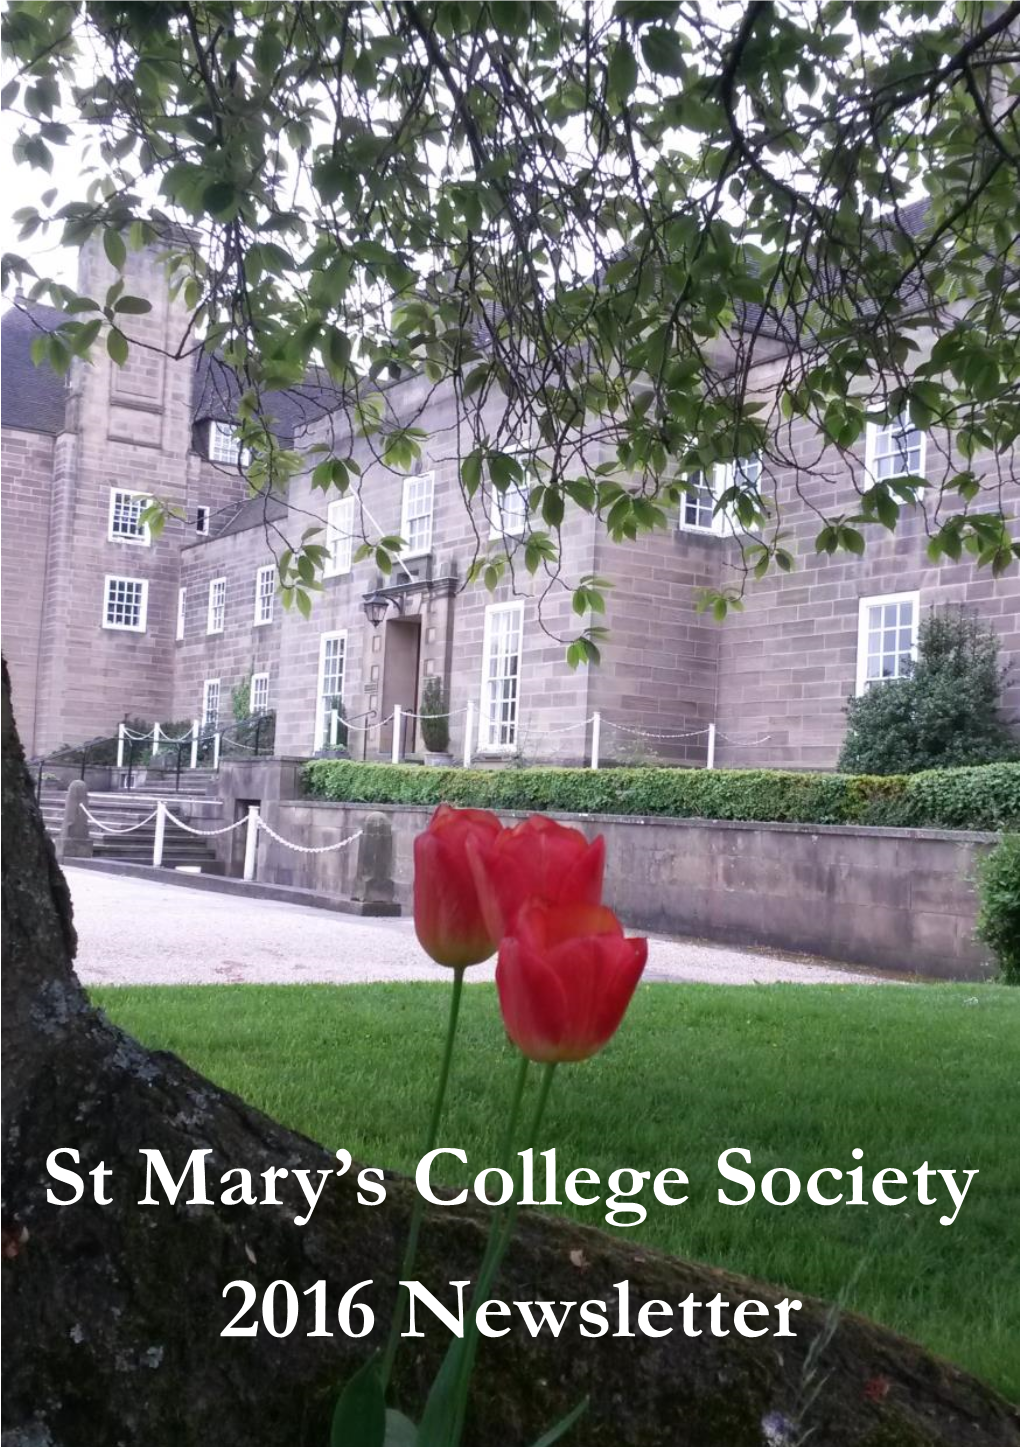 St Mary's College Society 2016 Newsletter